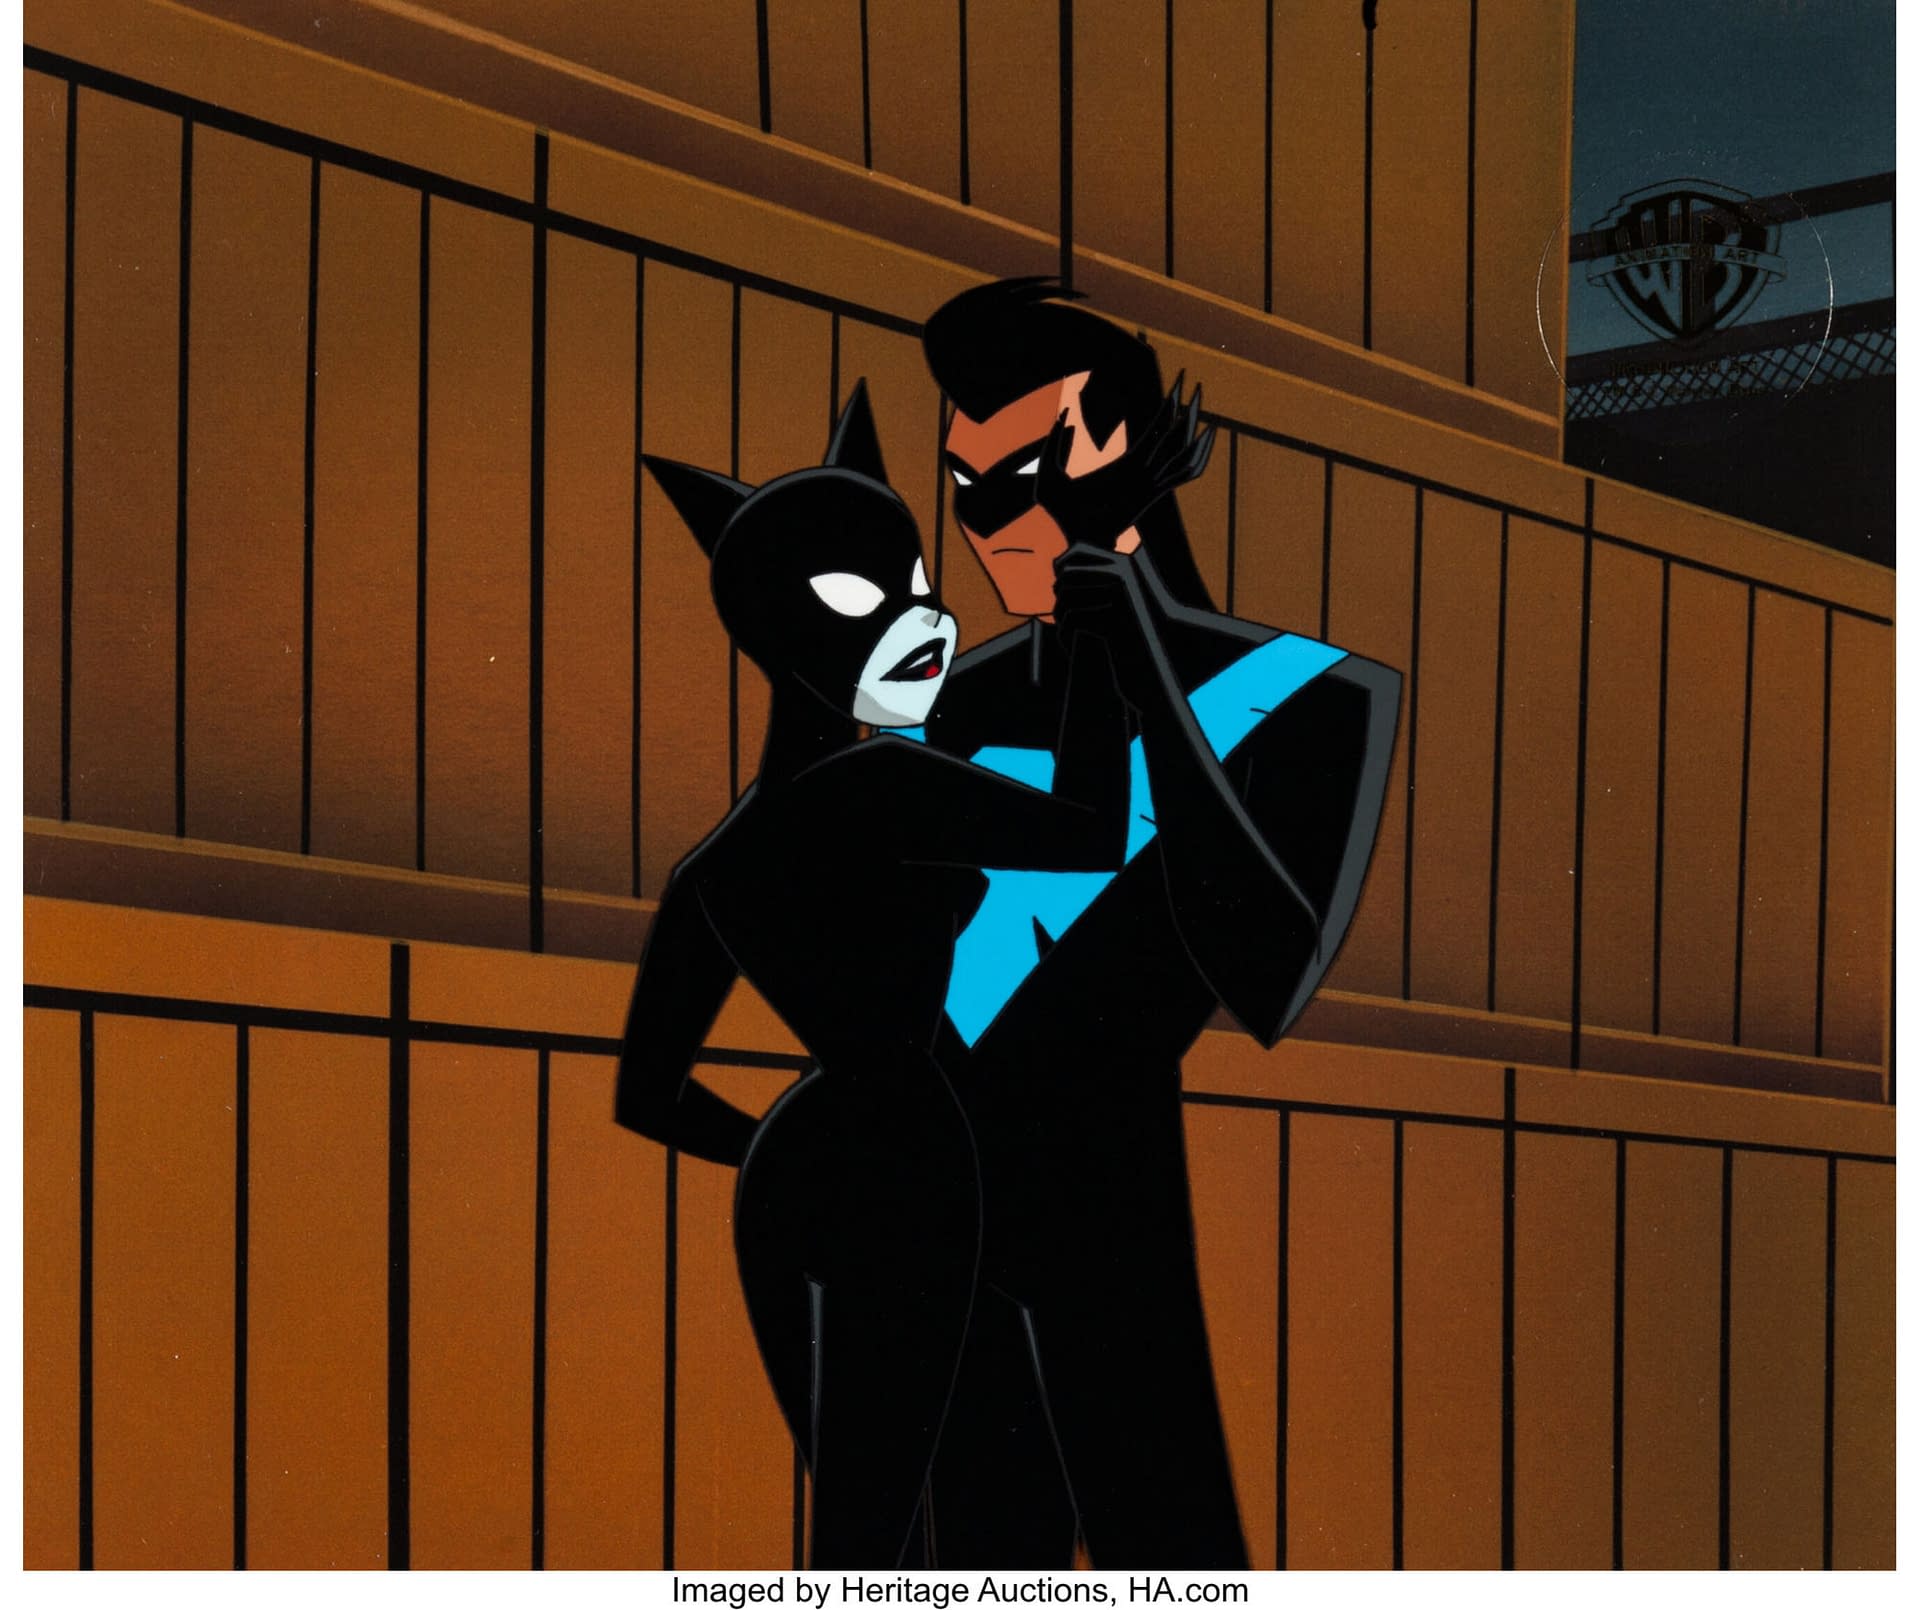 Batman: The Animated Series' Catwoman & Nightwing Get Close